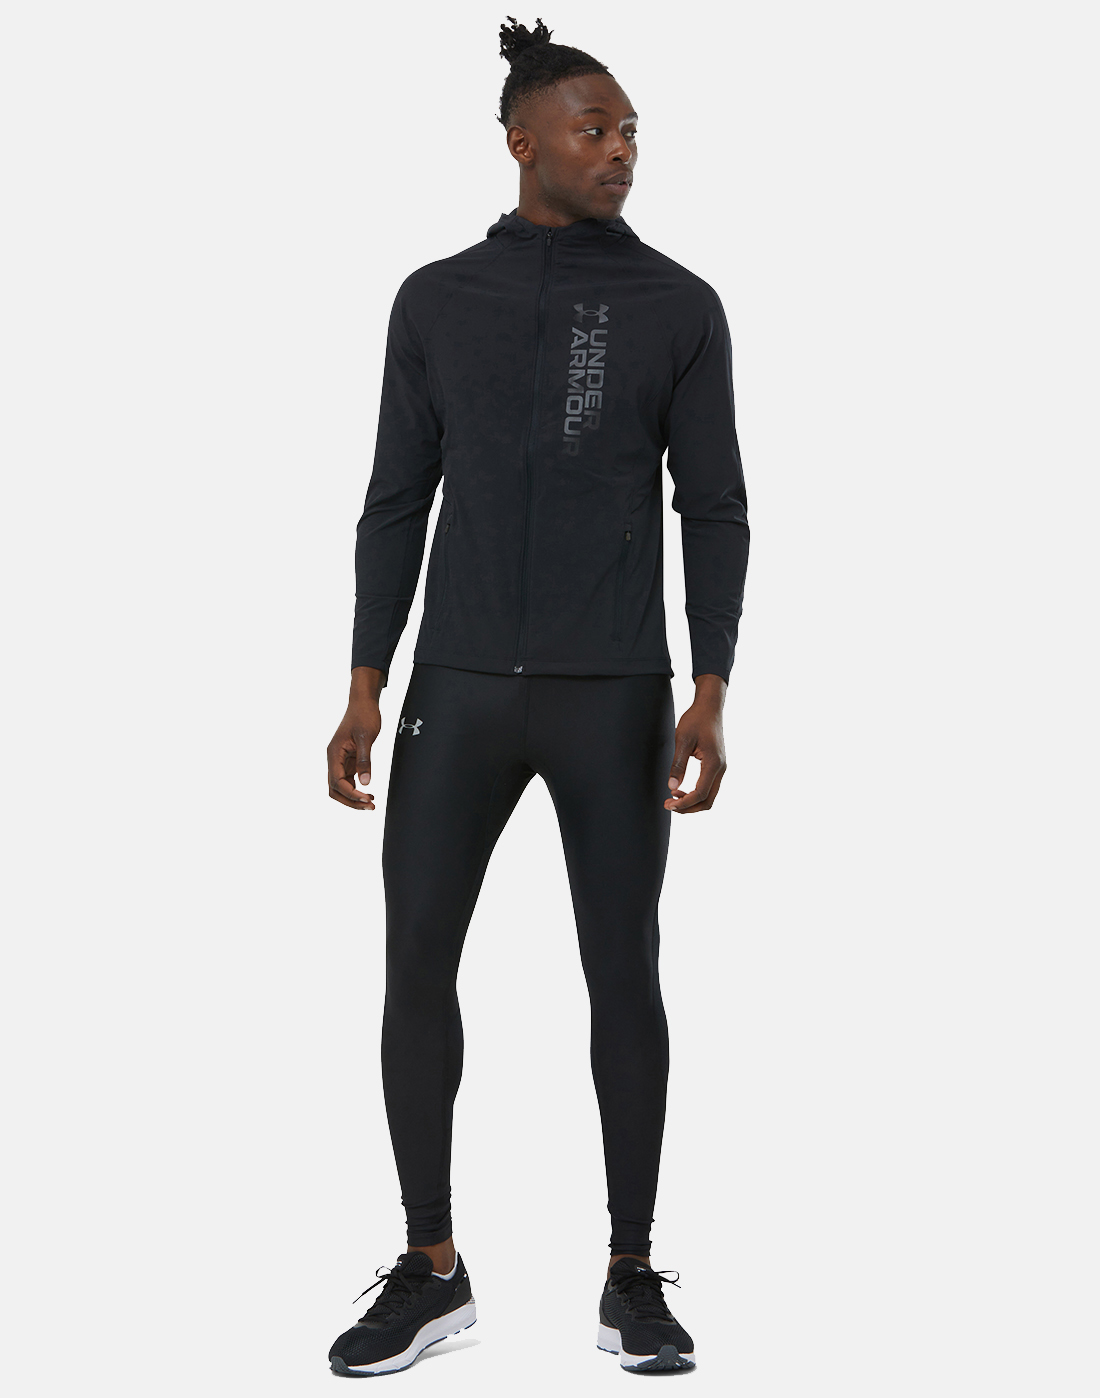 Under Armour Mens Outrun The Storm Jacket - Black